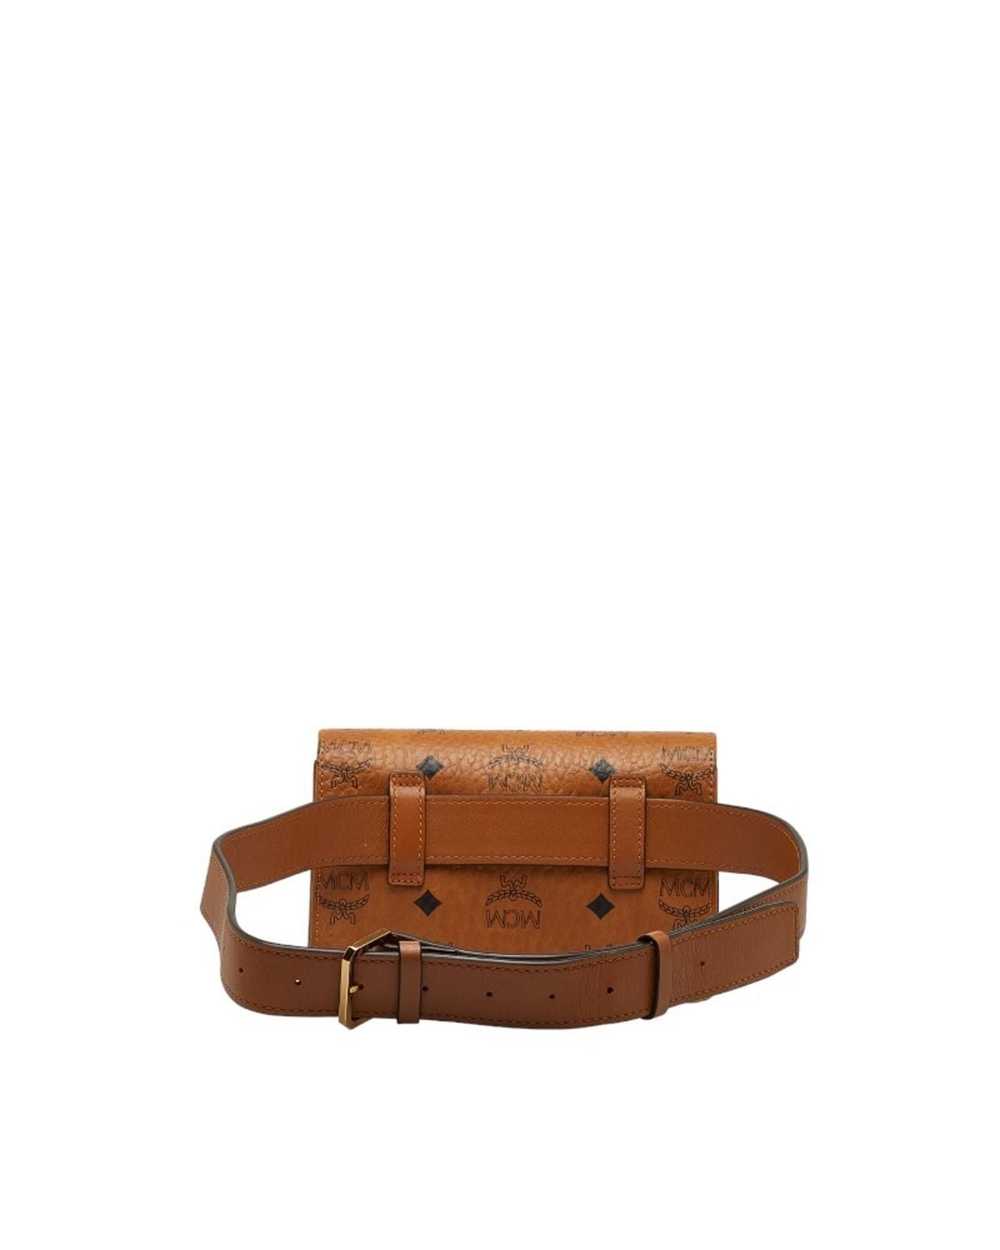 MCM Brown Leather Fanny Pack - image 3